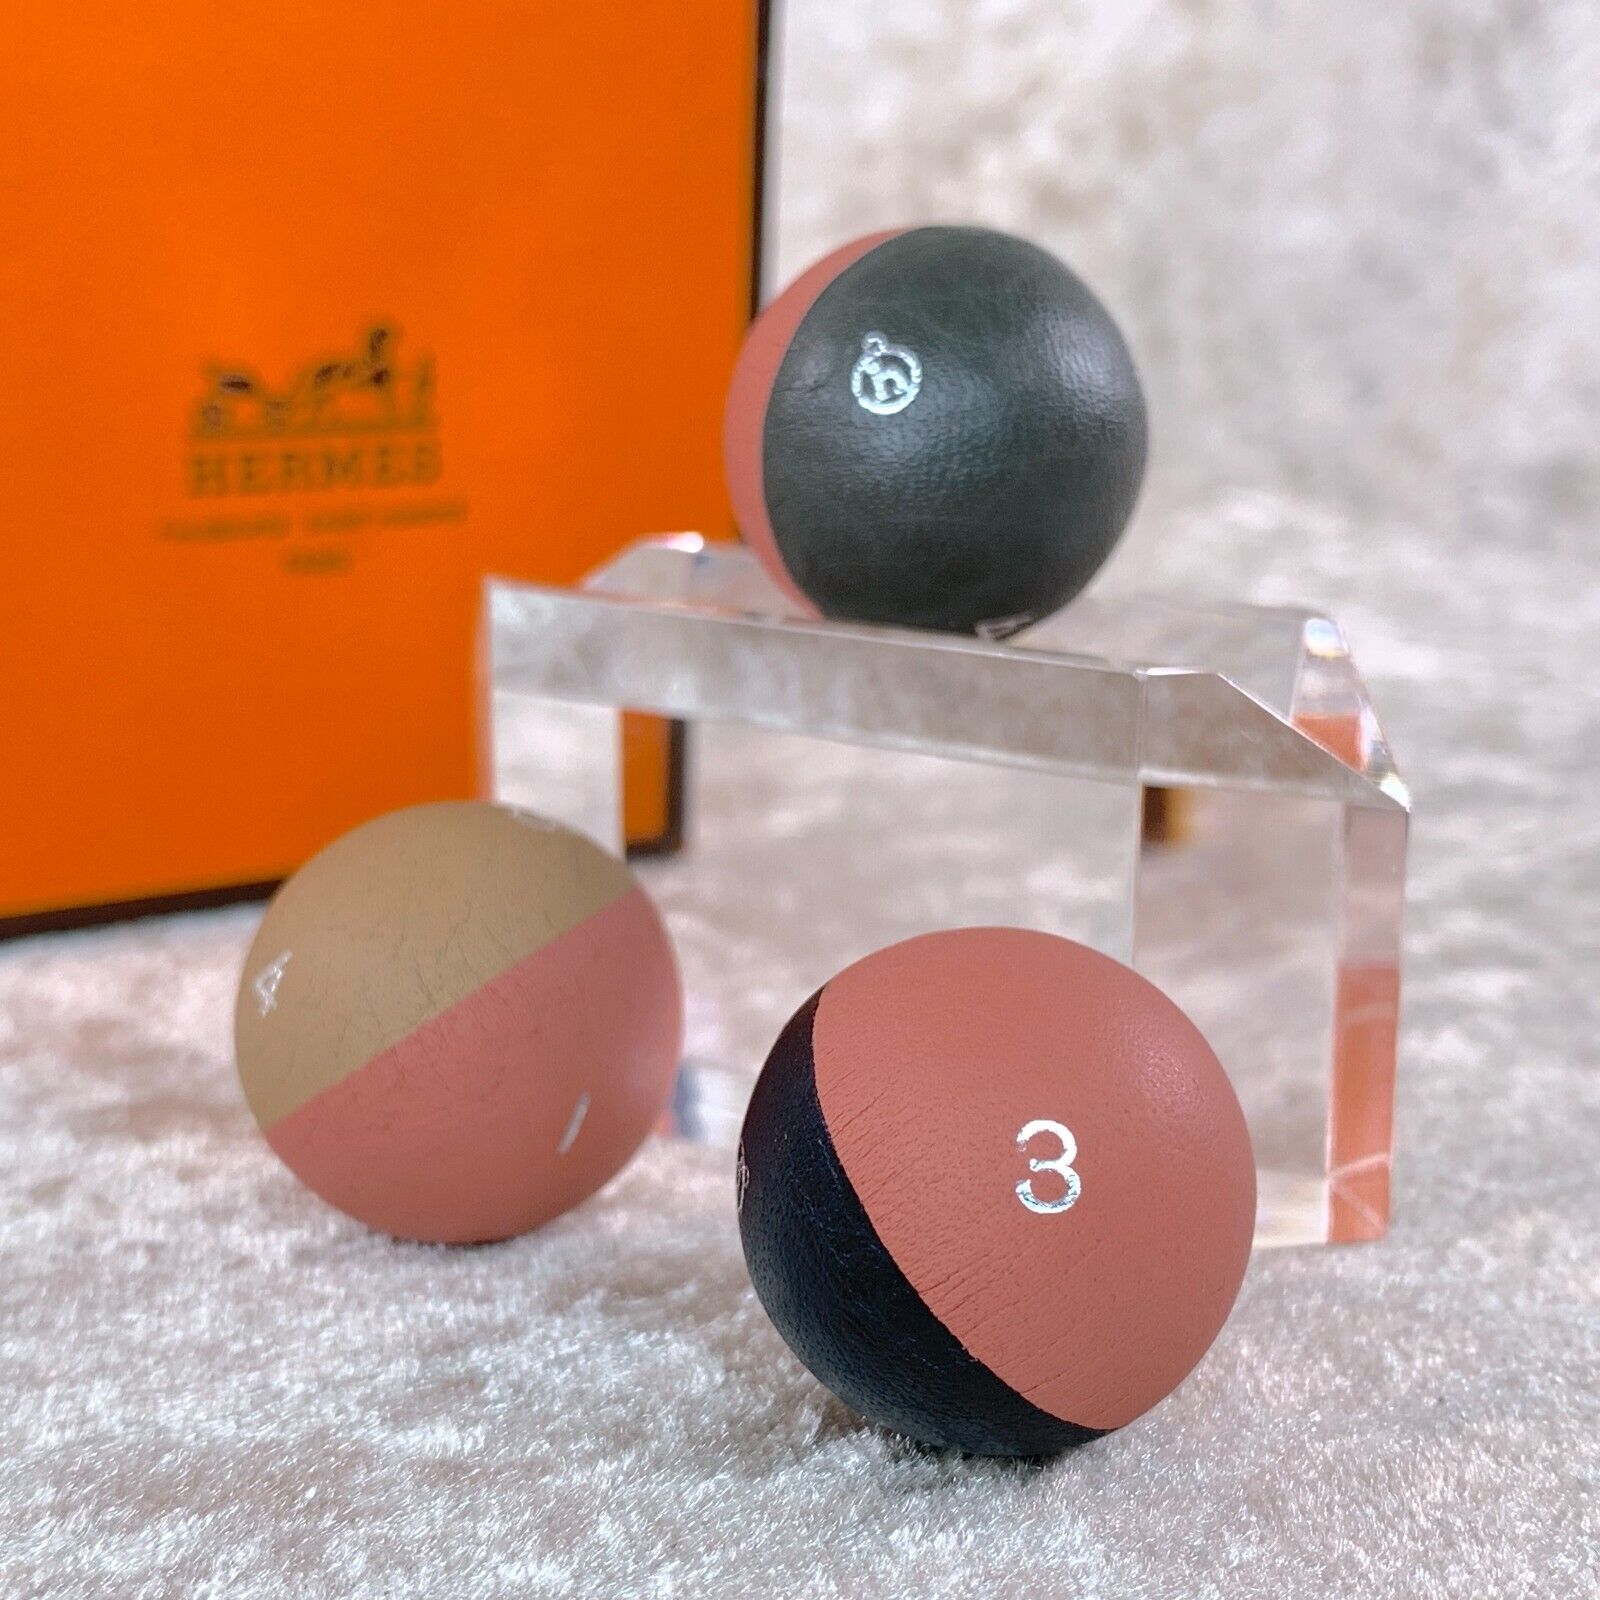 Authentic Hermes Paris Ball Dice Petit h Triple Globe Gaming Set of 3 with Case